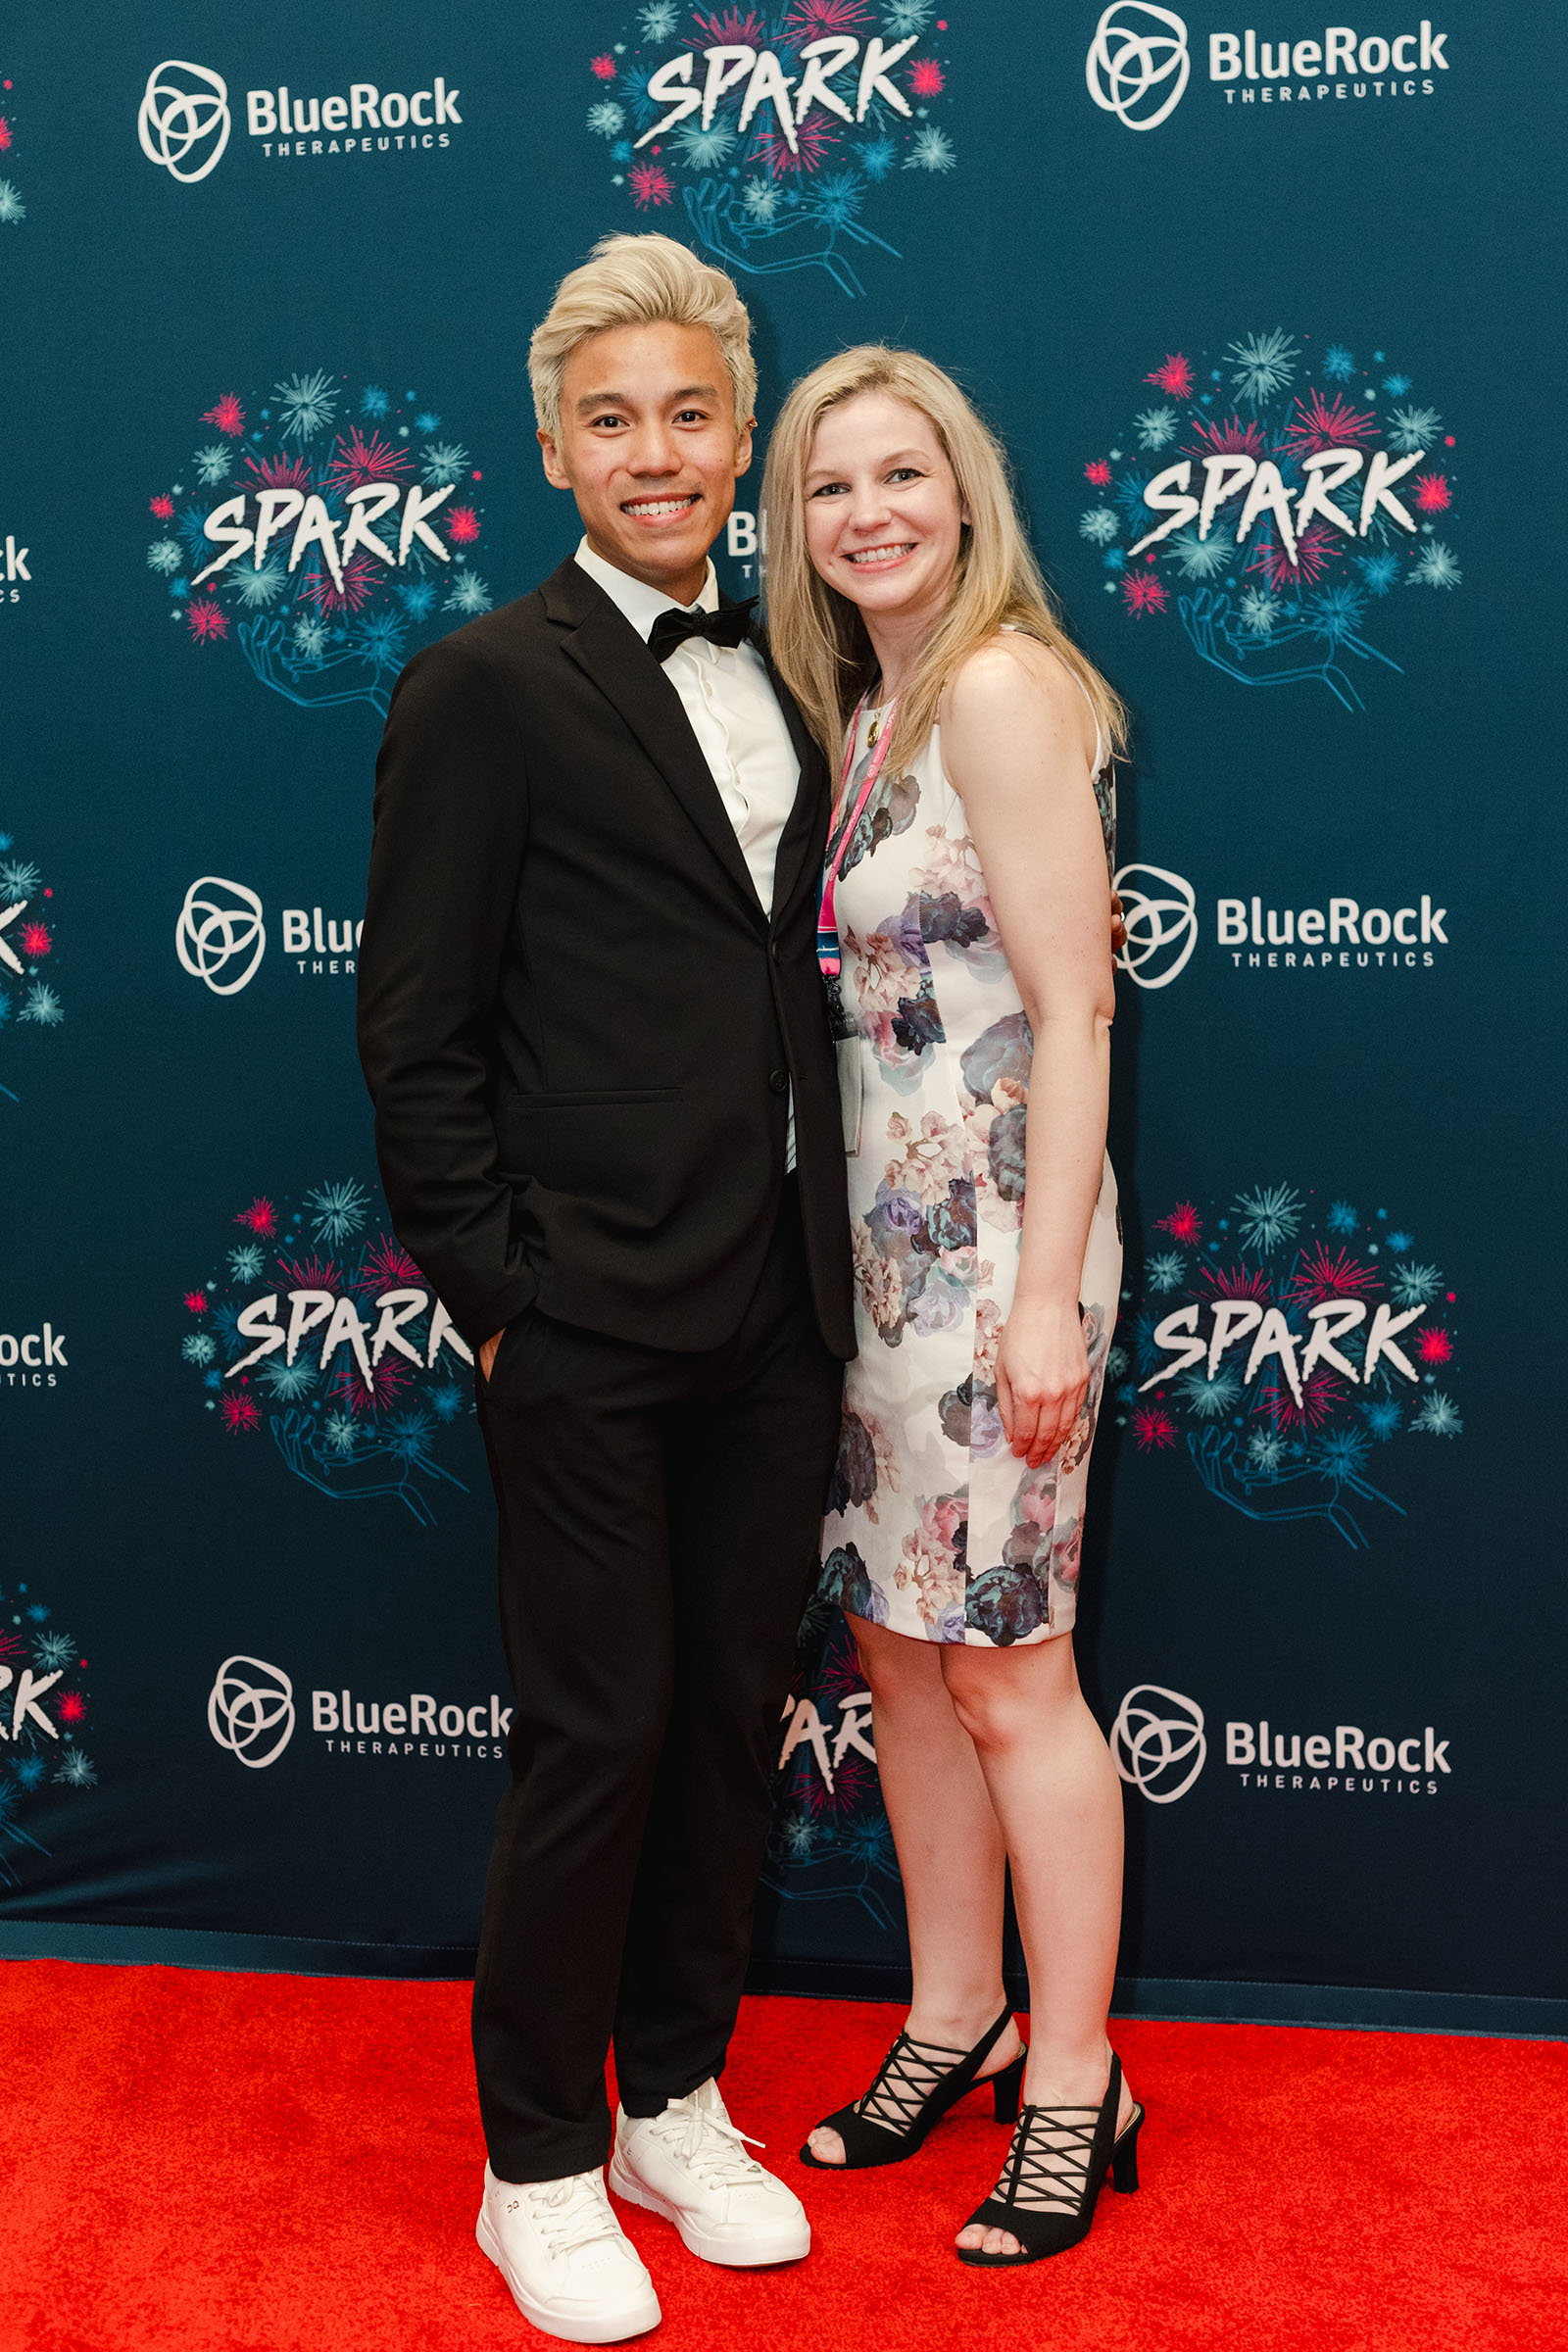 Two people stand on a red carpet in front of a BlueRock Therapeutics "Spark" event backdrop. One person is in a black suit and white sneakers, and the other is in a floral dress and black heels. Event photography captures this stylish moment perfectly.